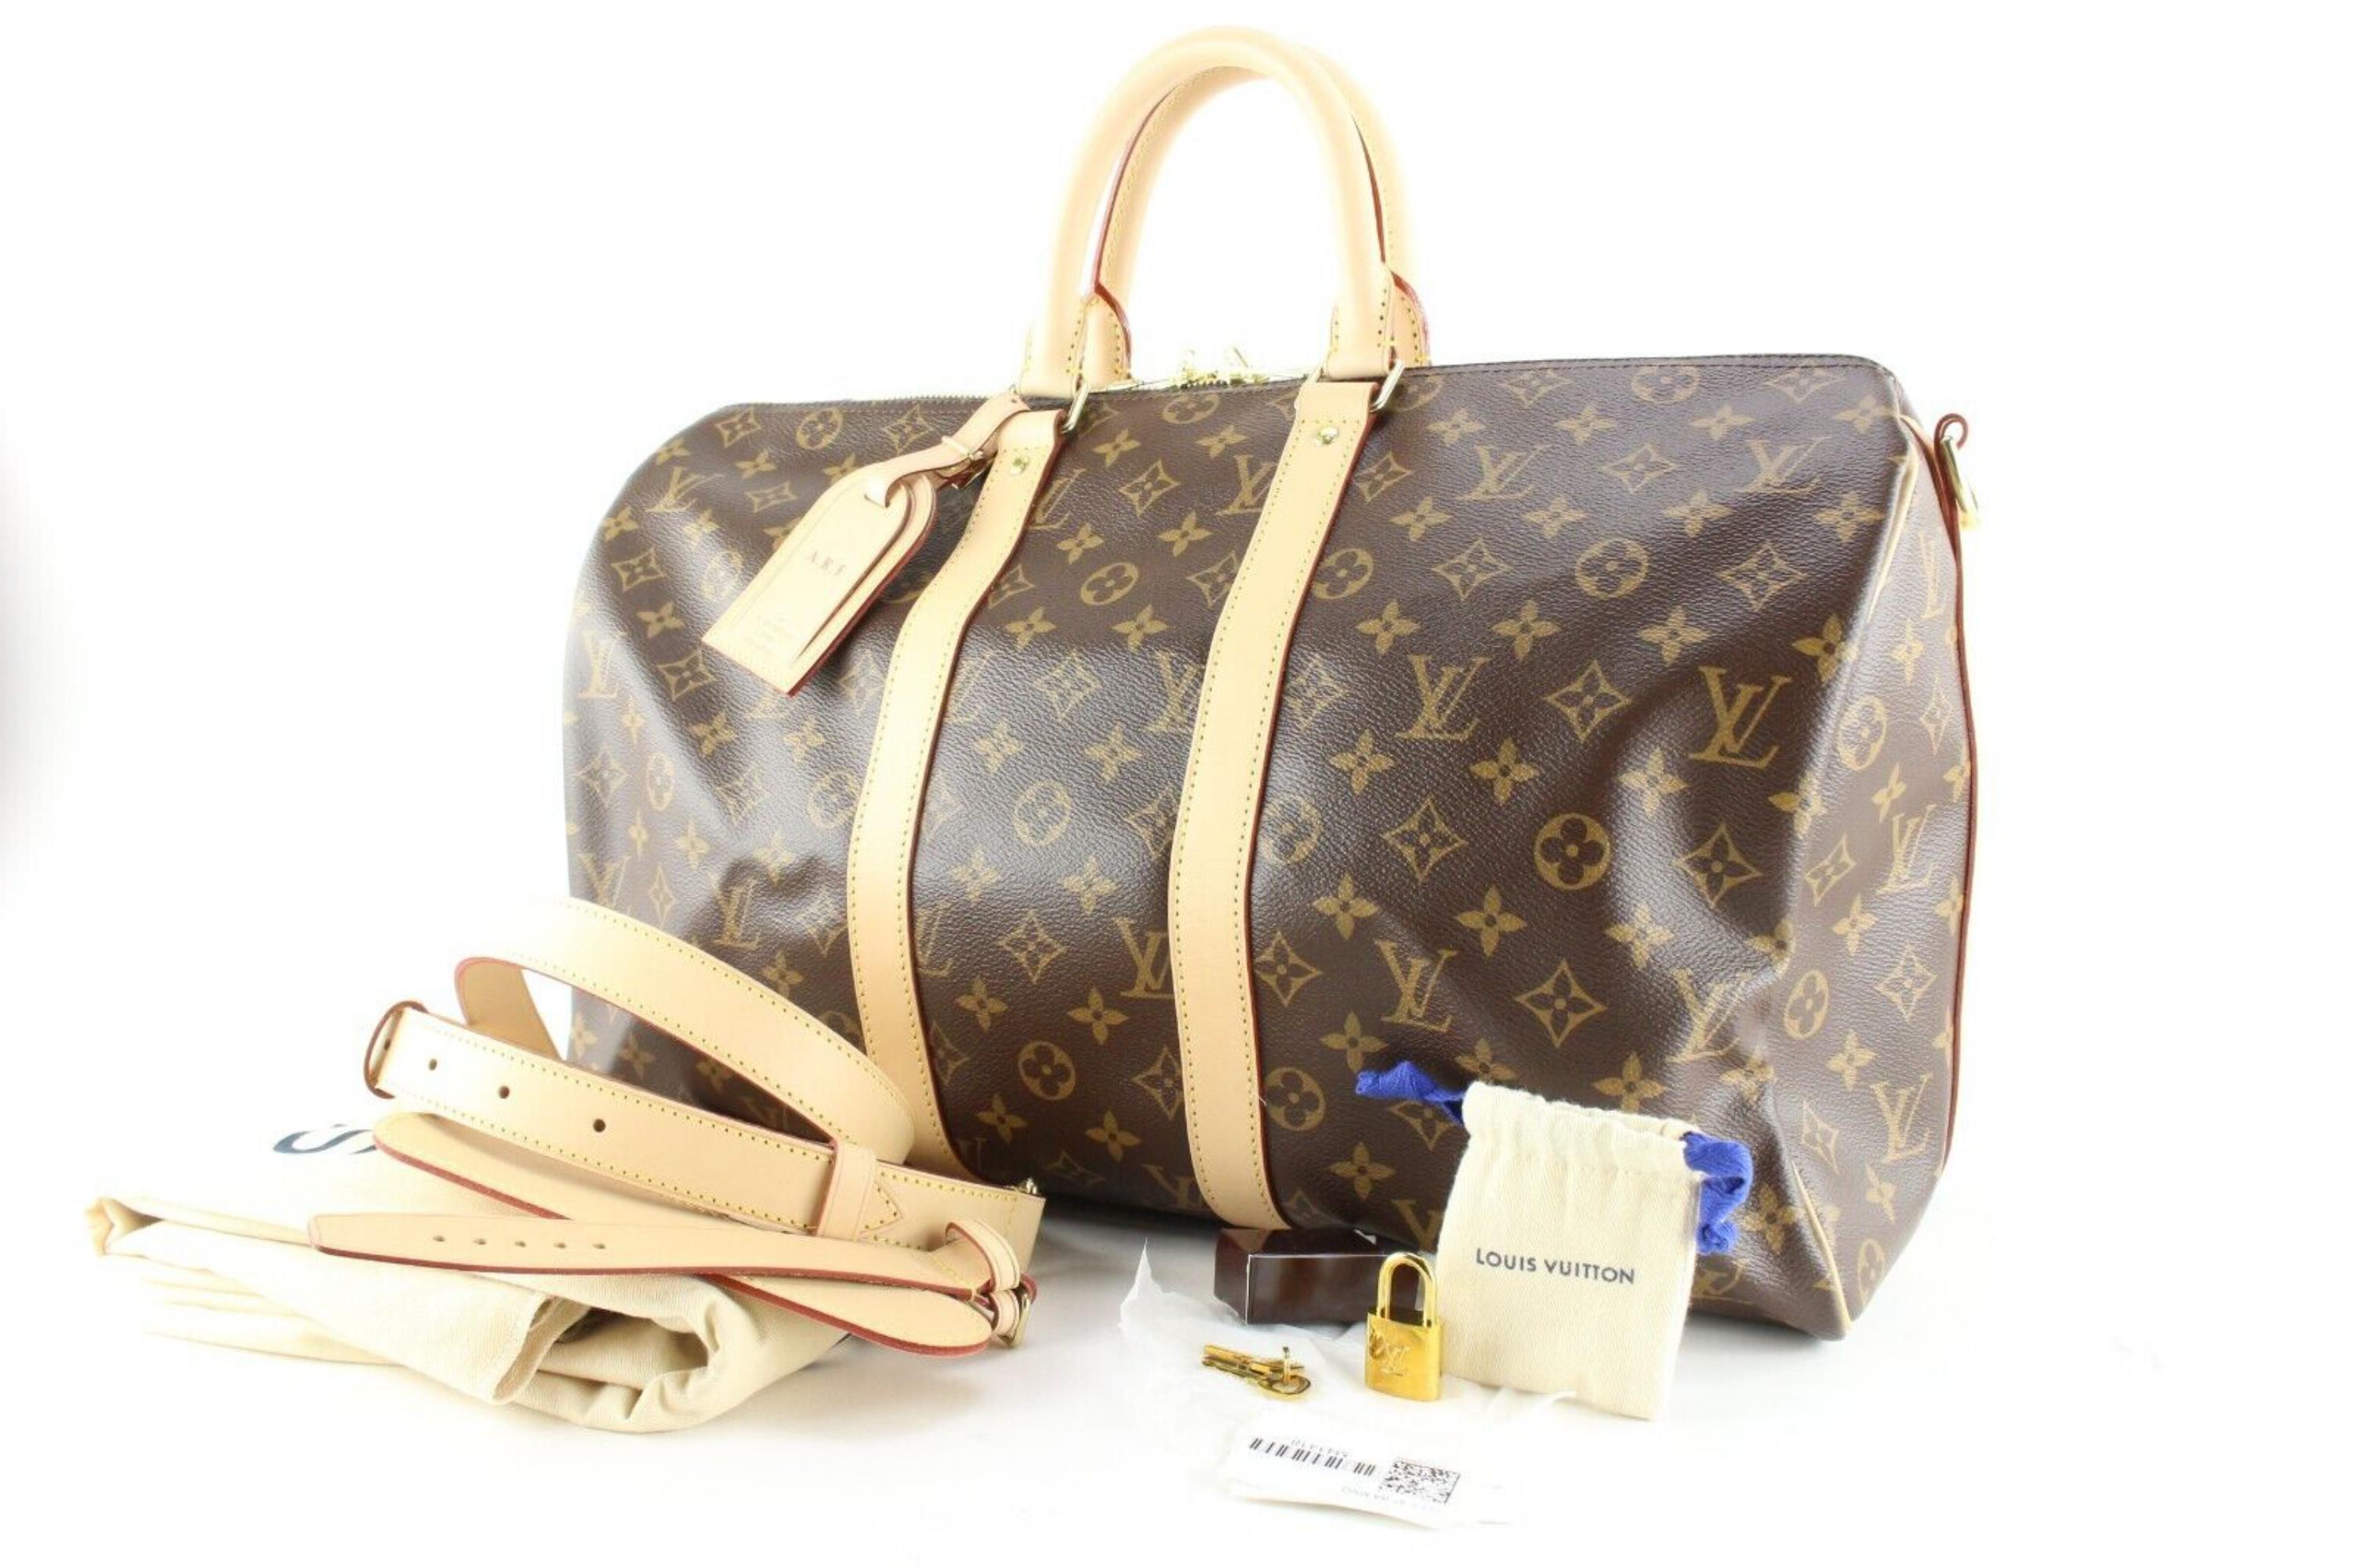 Louis Vuitton Monogram Keepall Bandouliere 45 Duffle with Strap 5LK0222 For Sale 5